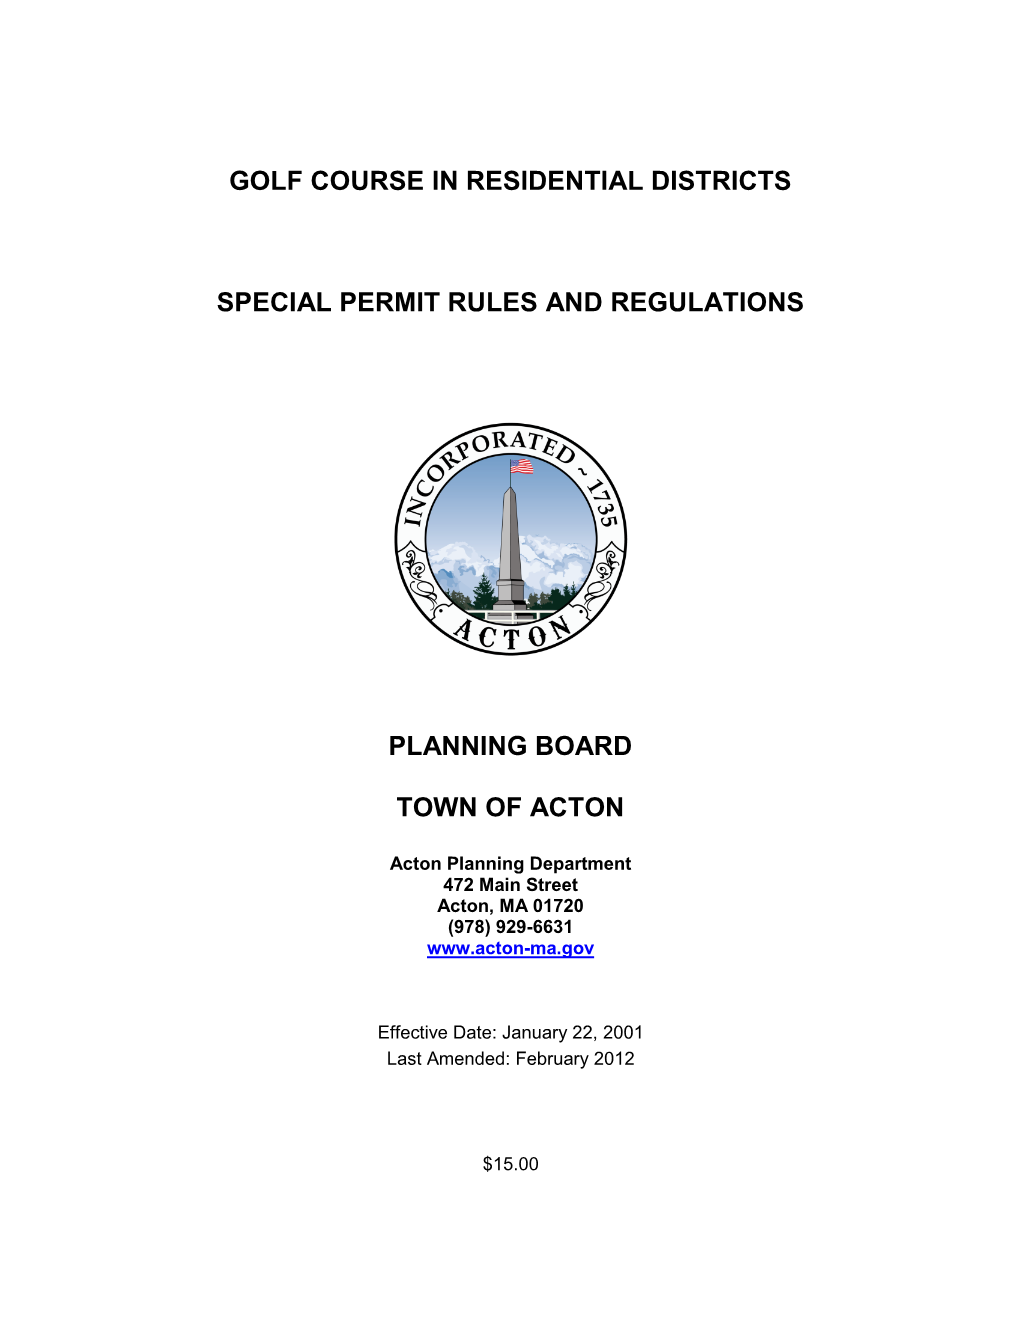 GOLF COURSE in Residential Districts Special PERMIT Rules and Regulations As Contained Herein